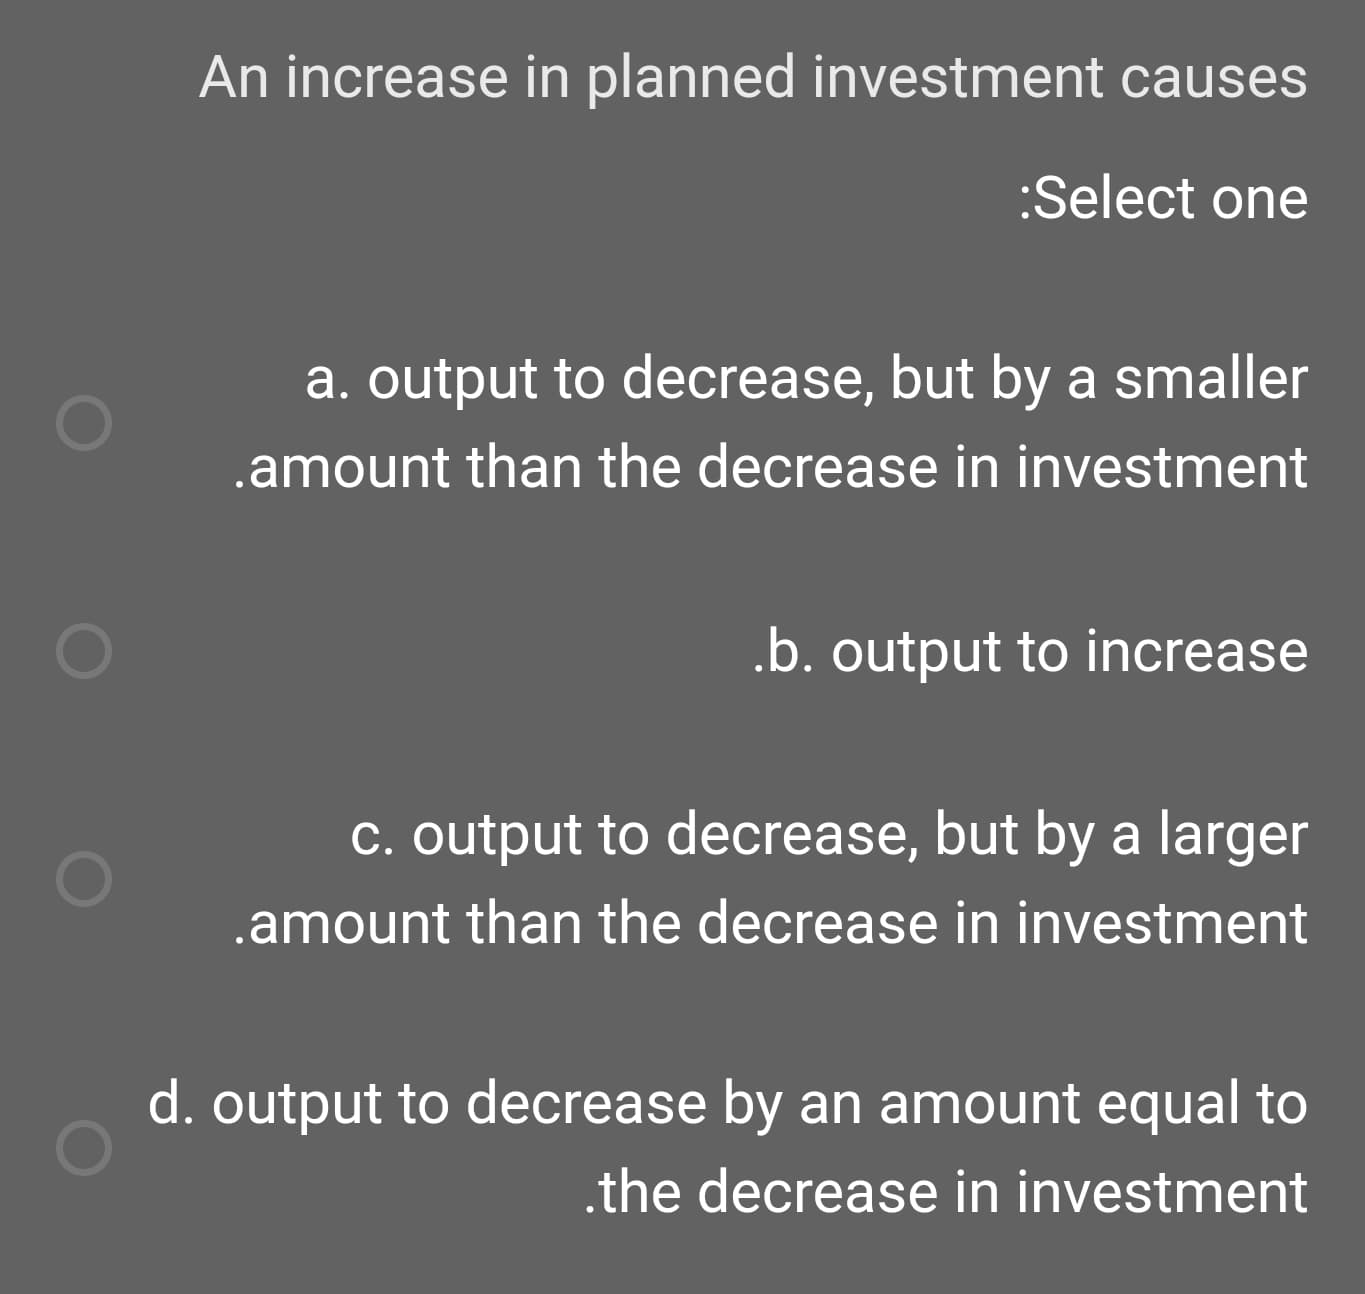 An increase in planned investment causes
:Select one
a. output to decrease, but by a smaller
.amount than the decrease in investment
.b. output to increase
c. output to decrease, but by a larger
.amount than the decrease in investment
d. output to decrease by an amount equal to
.the decrease in investment
